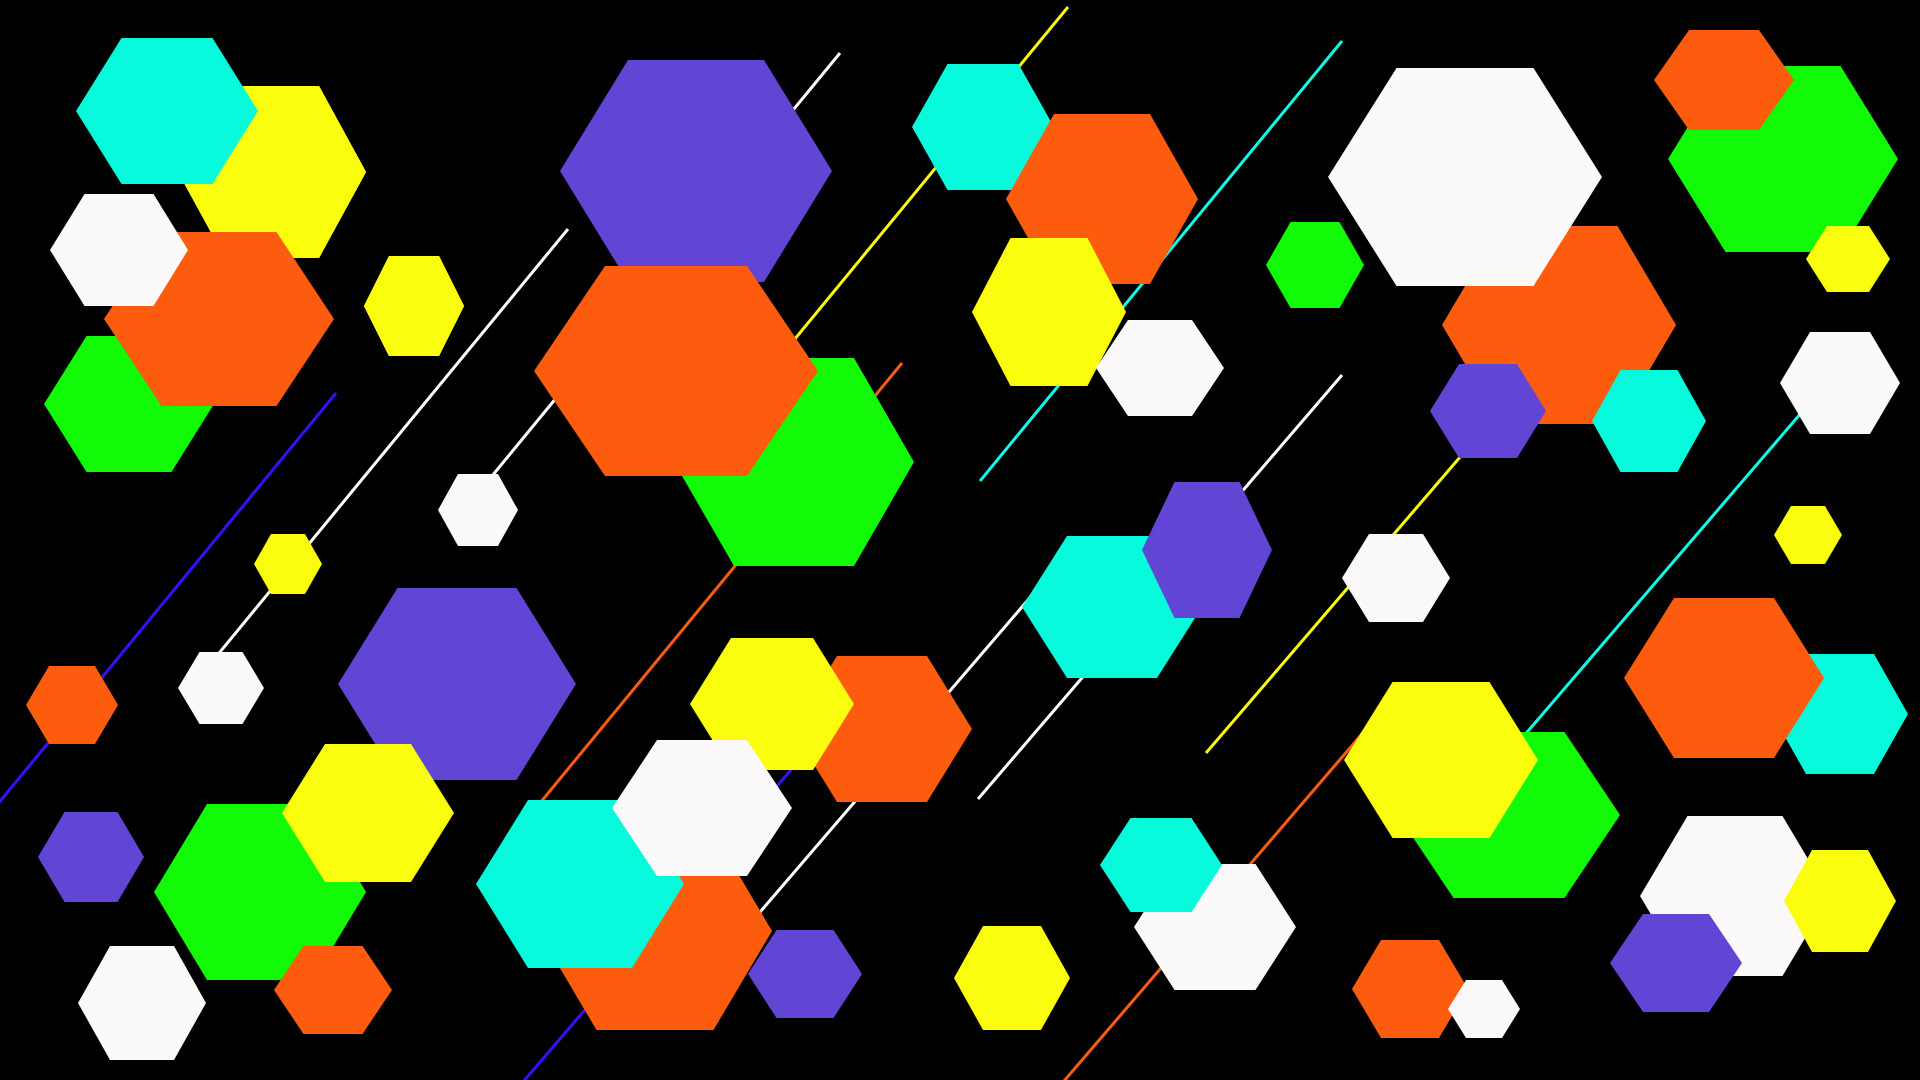 Abstract Colorful Digital Art Geometry Hexagon Shapes 1920x1080